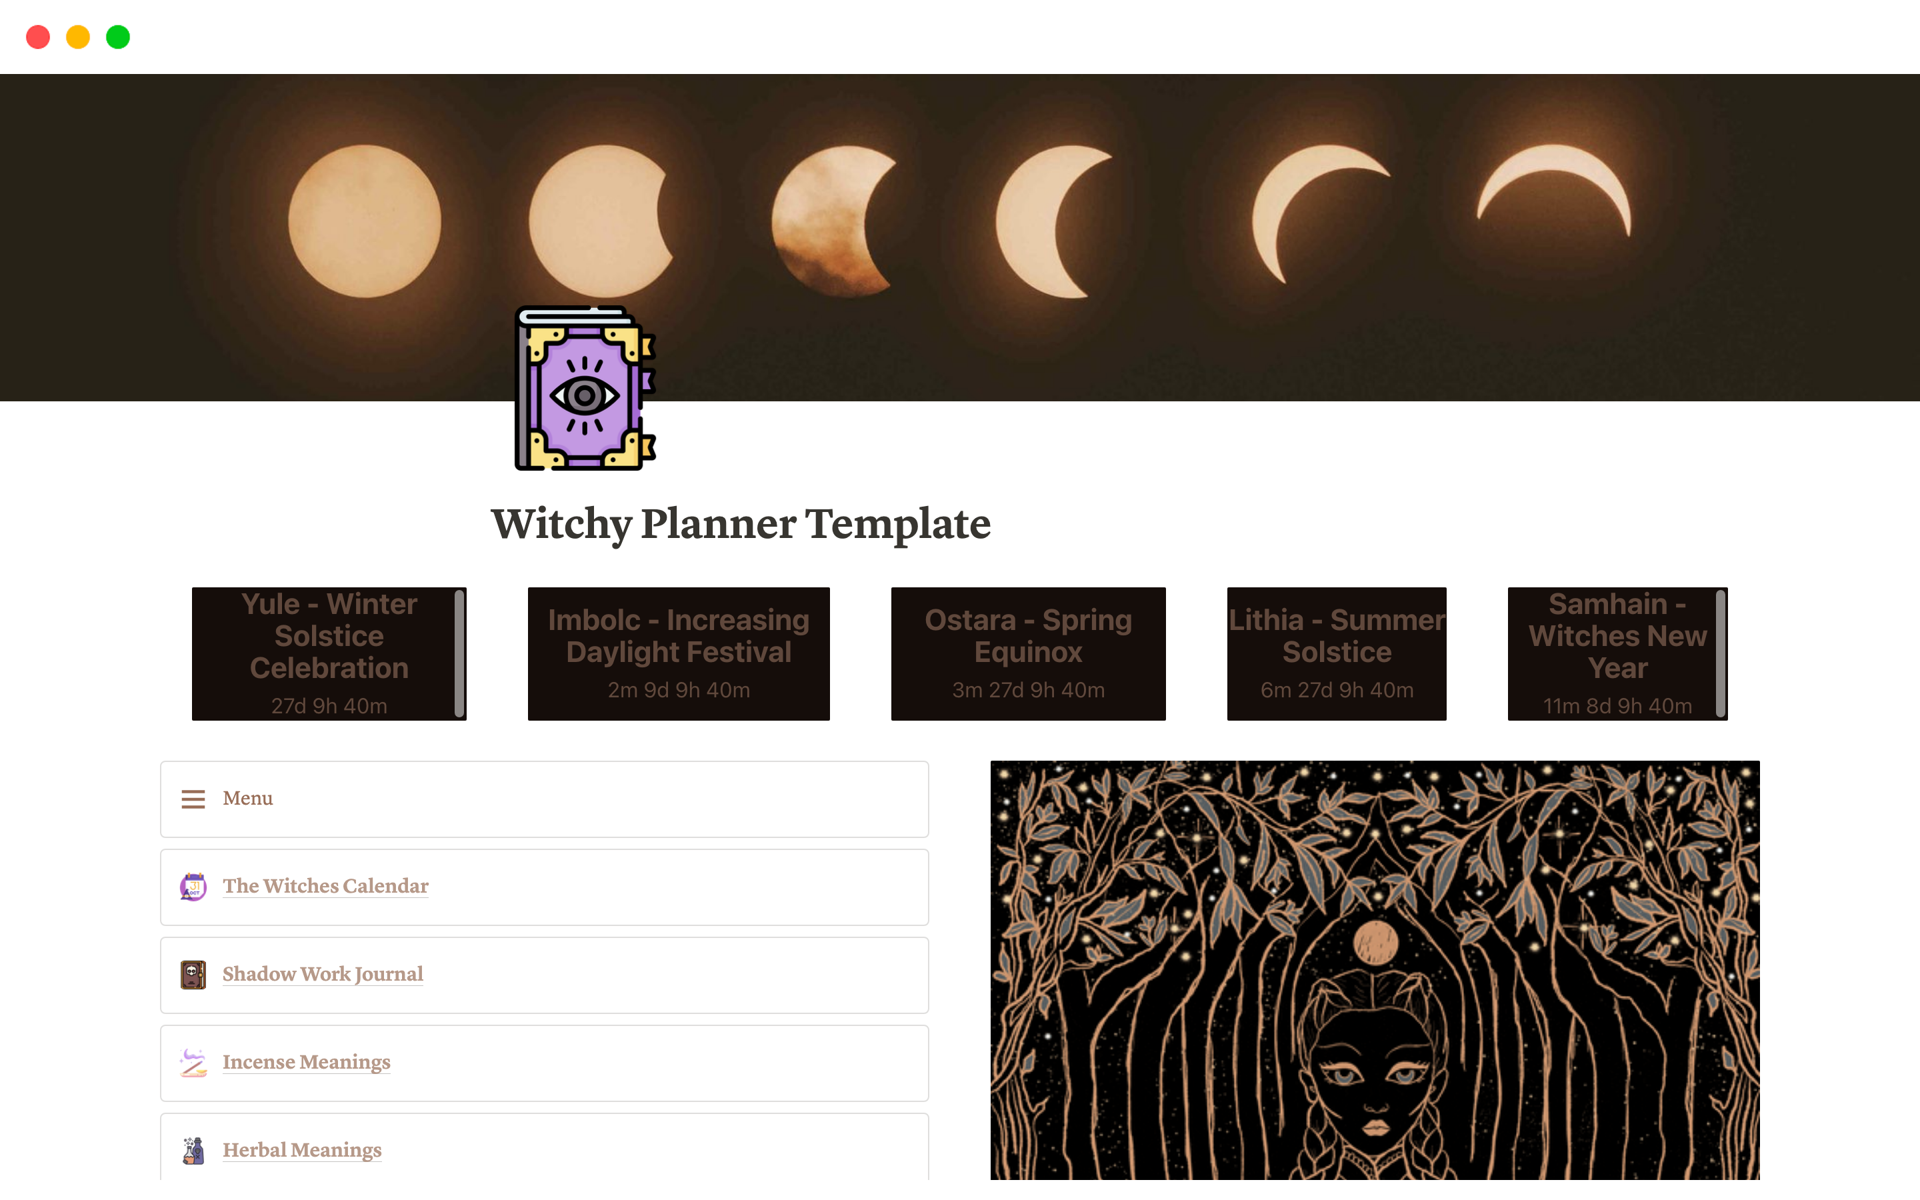 Witchy Planner Template with Tarot Card Randomizer